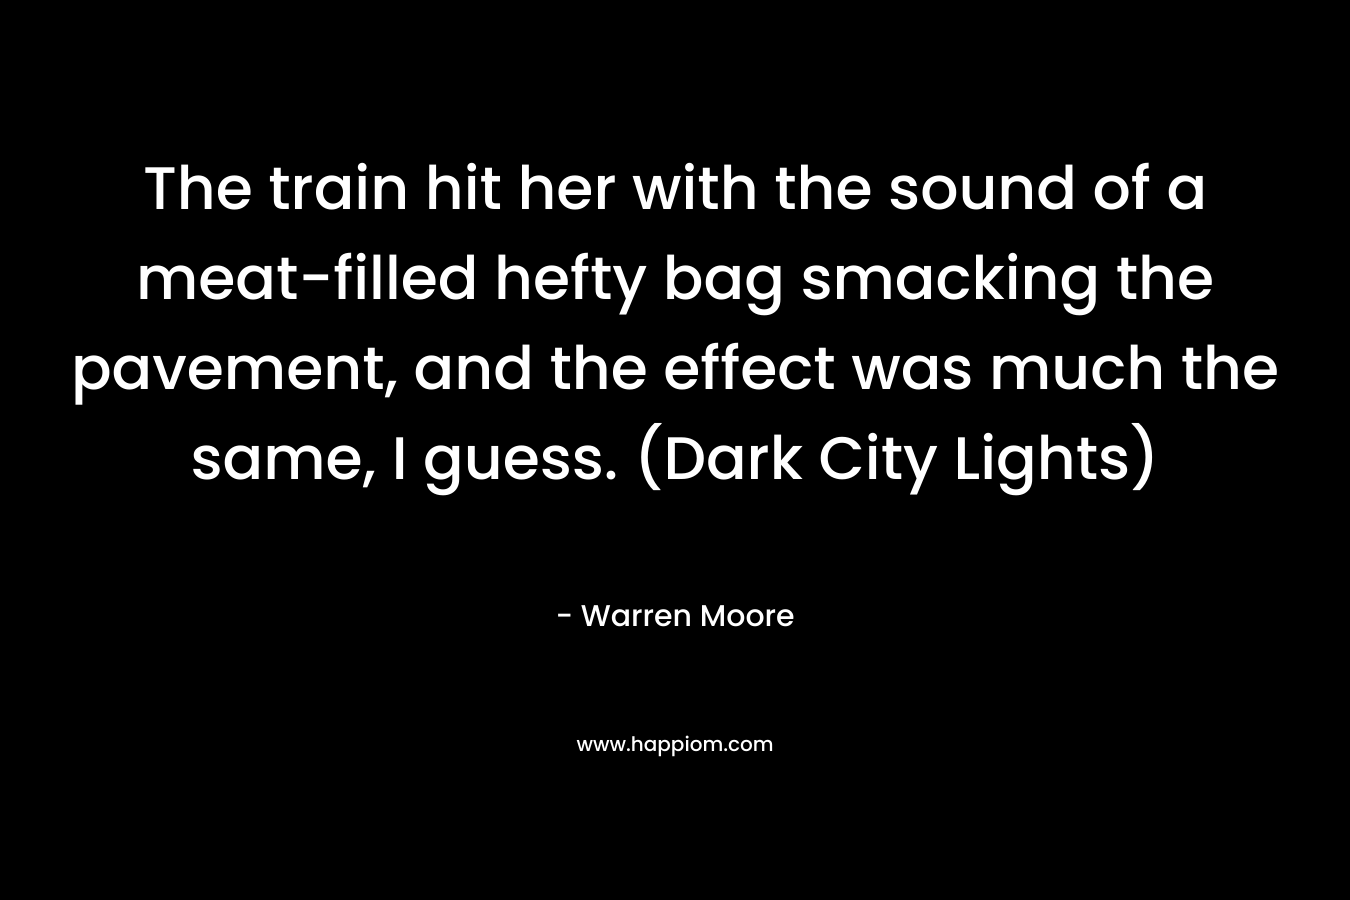 The train hit her with the sound of a meat-filled hefty bag smacking the pavement, and the effect was much the same, I guess. (Dark City Lights) – Warren Moore